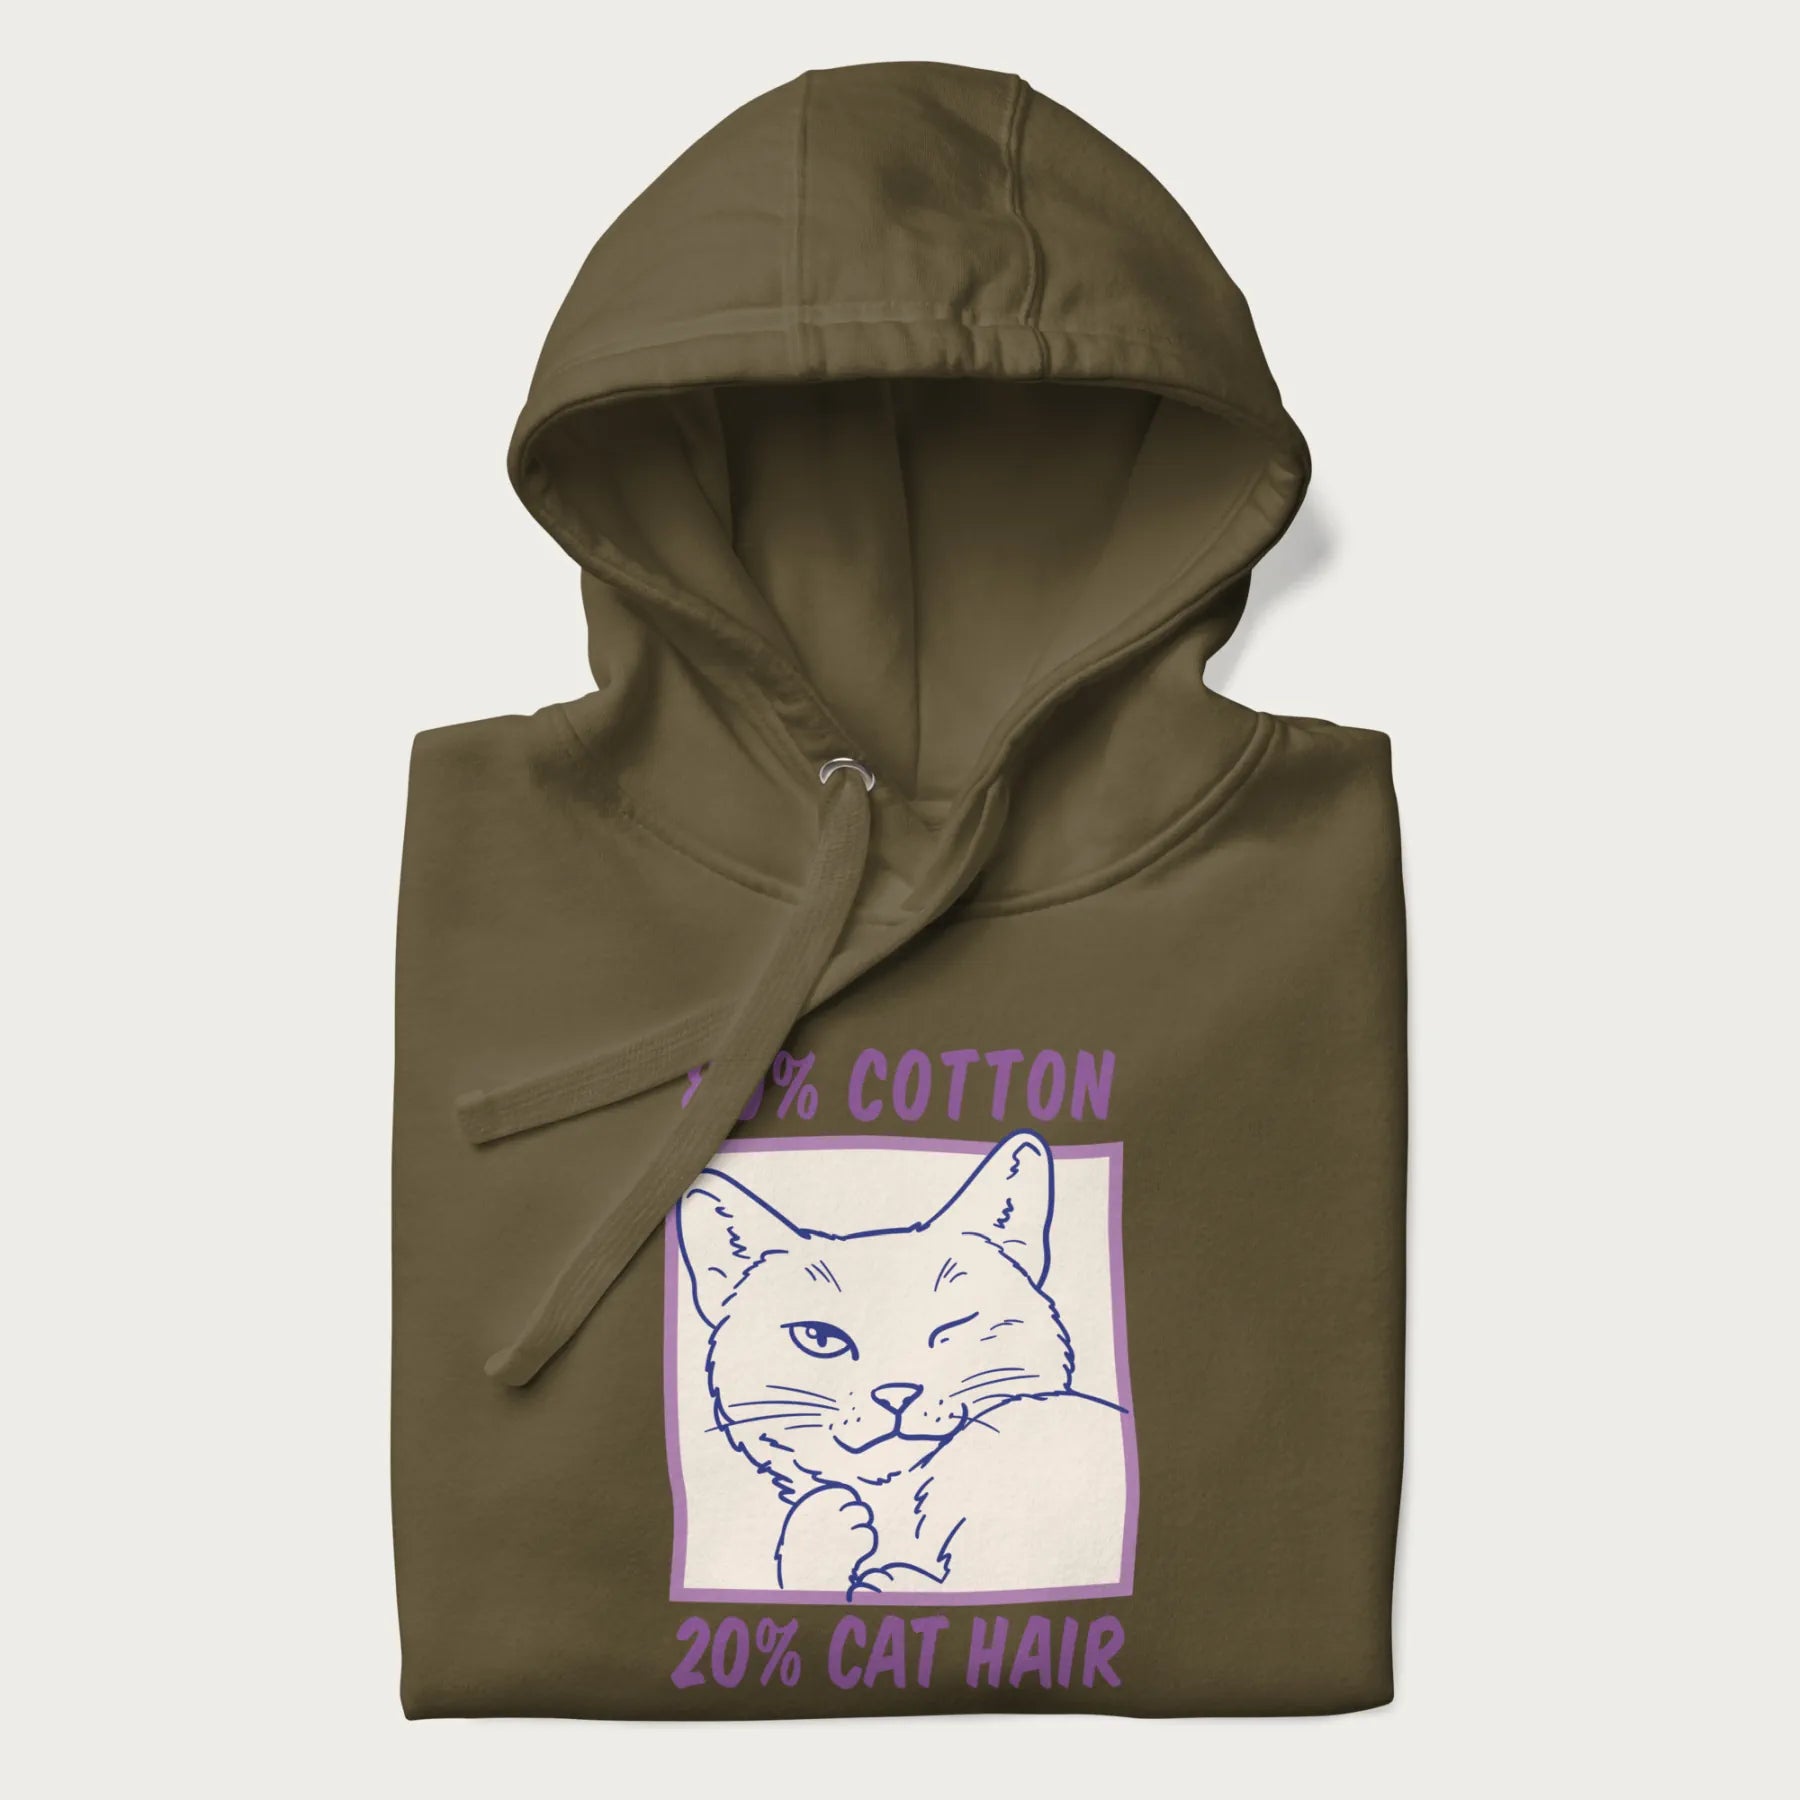 Folded military green hoodie with graphic of a winking cat with the text "80% cotton 20% cat hair".